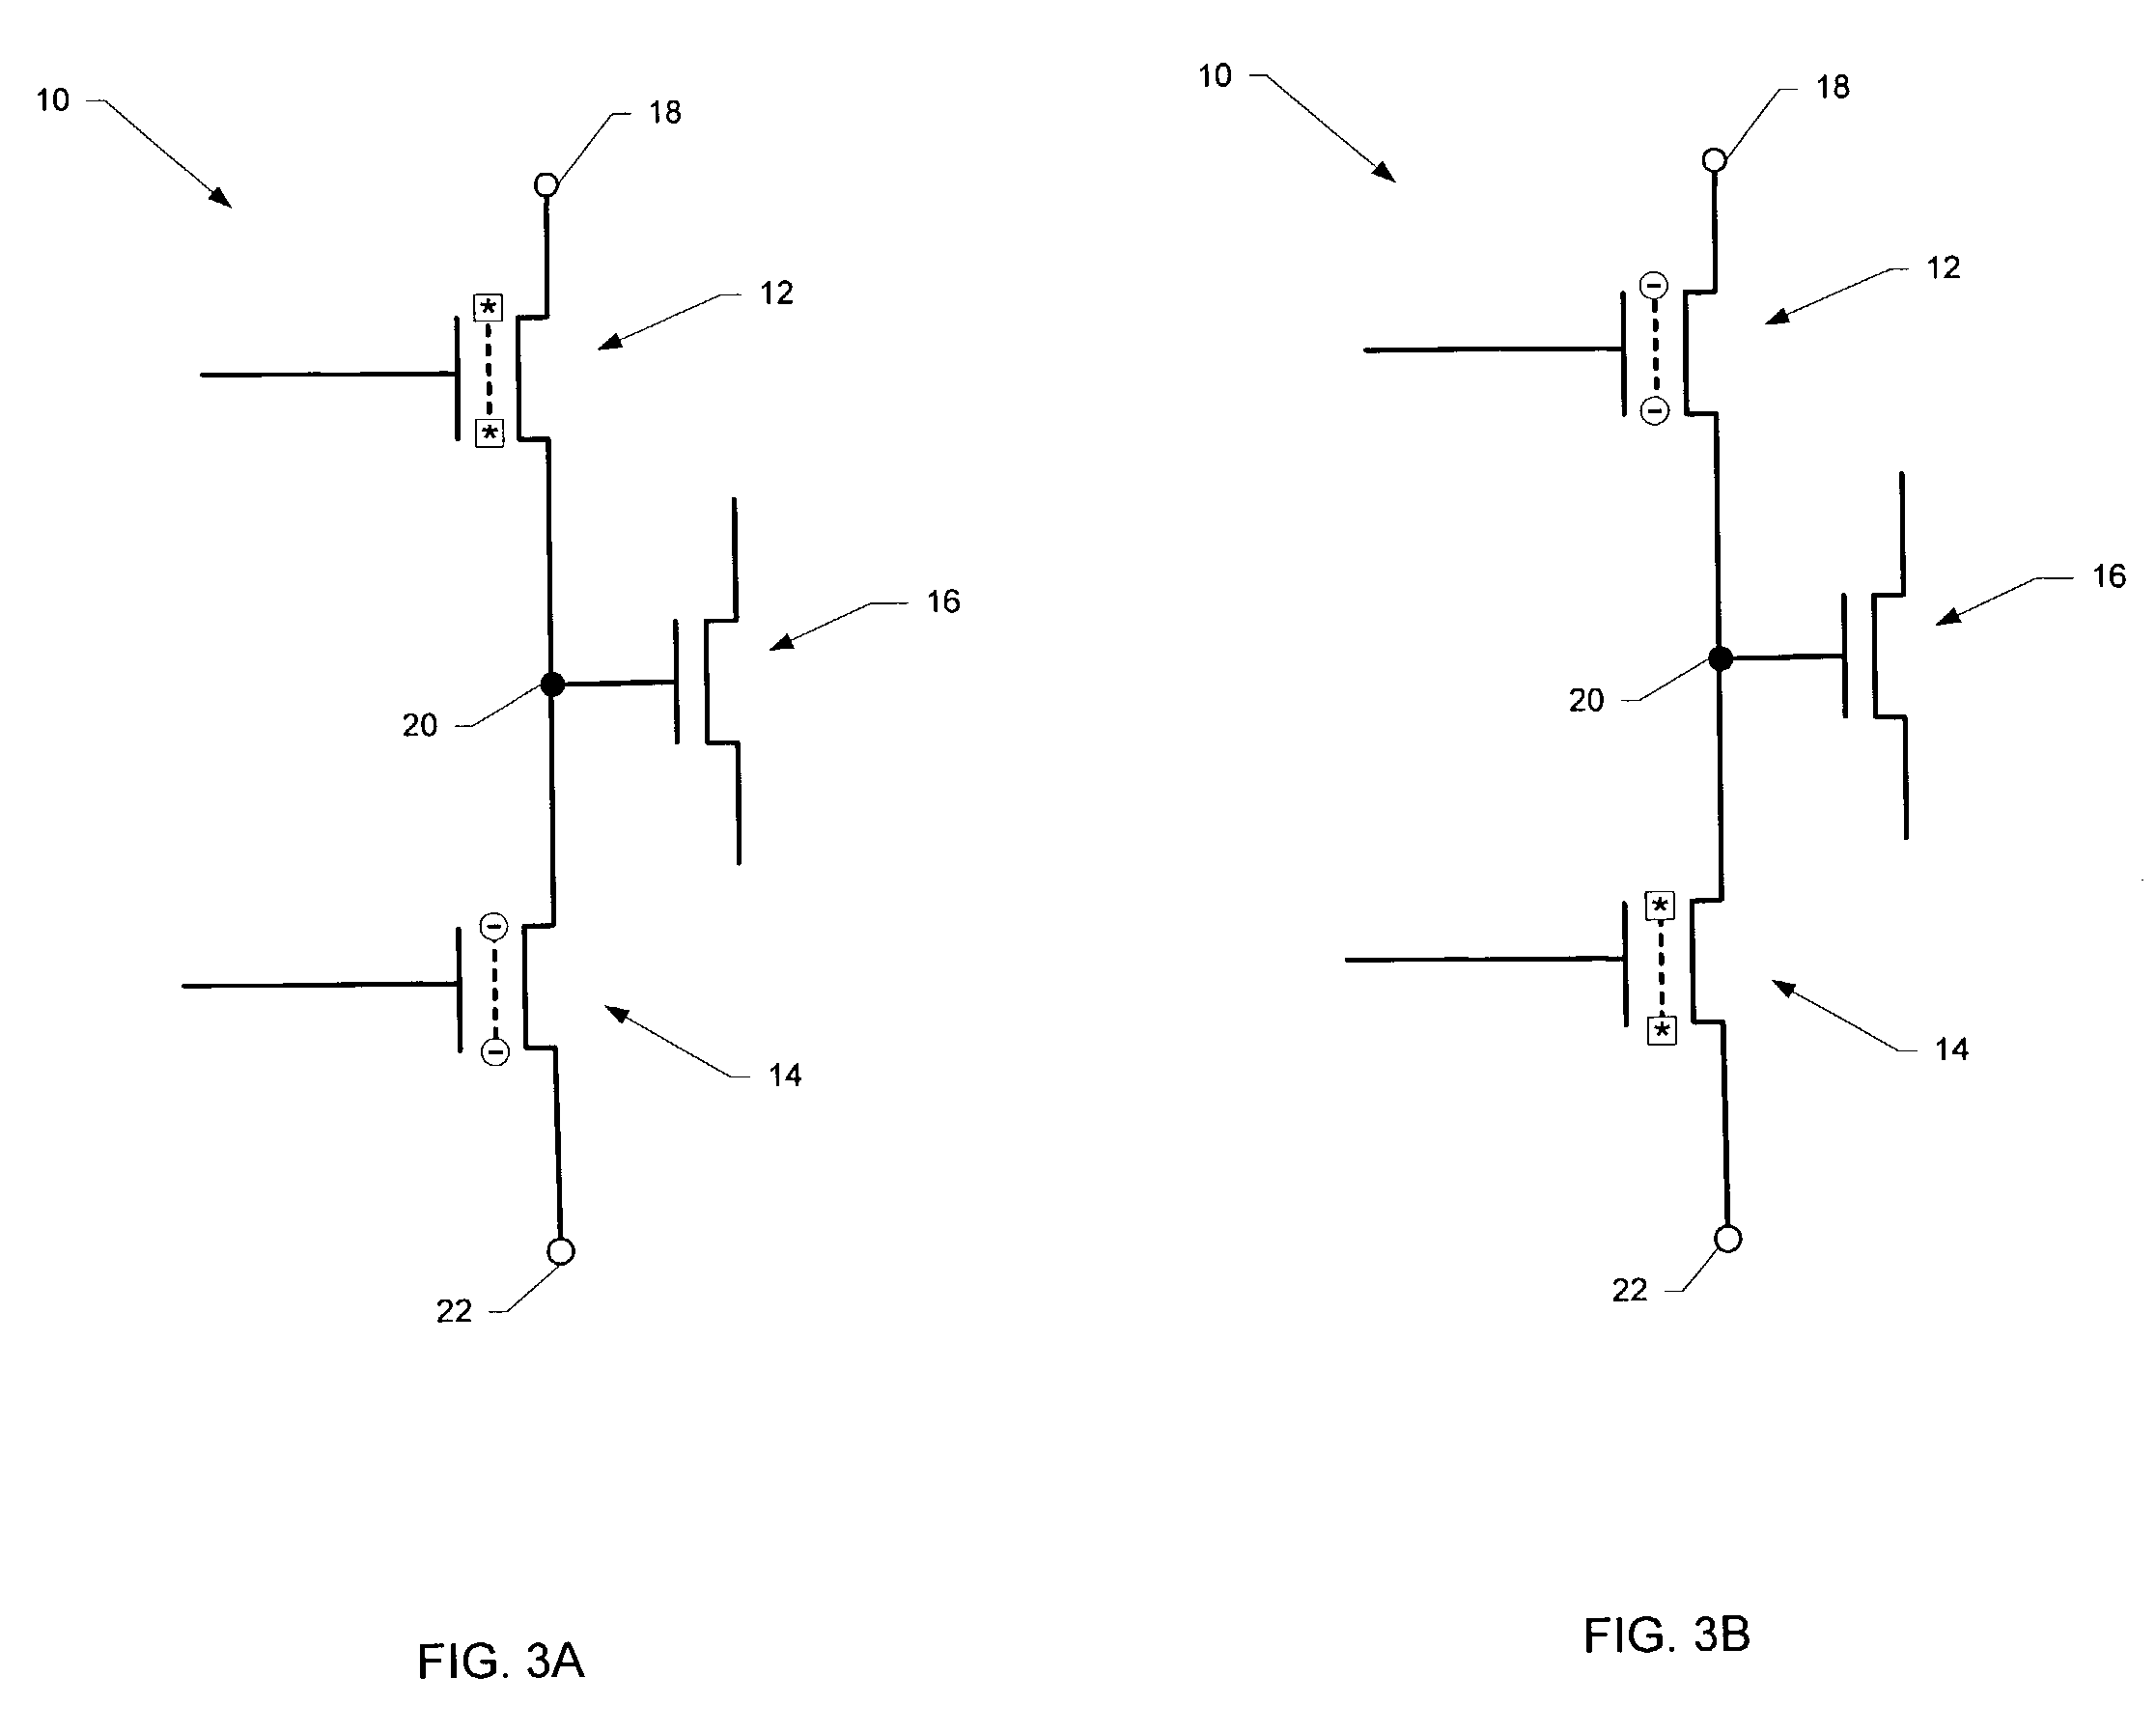 Methods of redundancy in a floating trap memory element based field programmable gate array